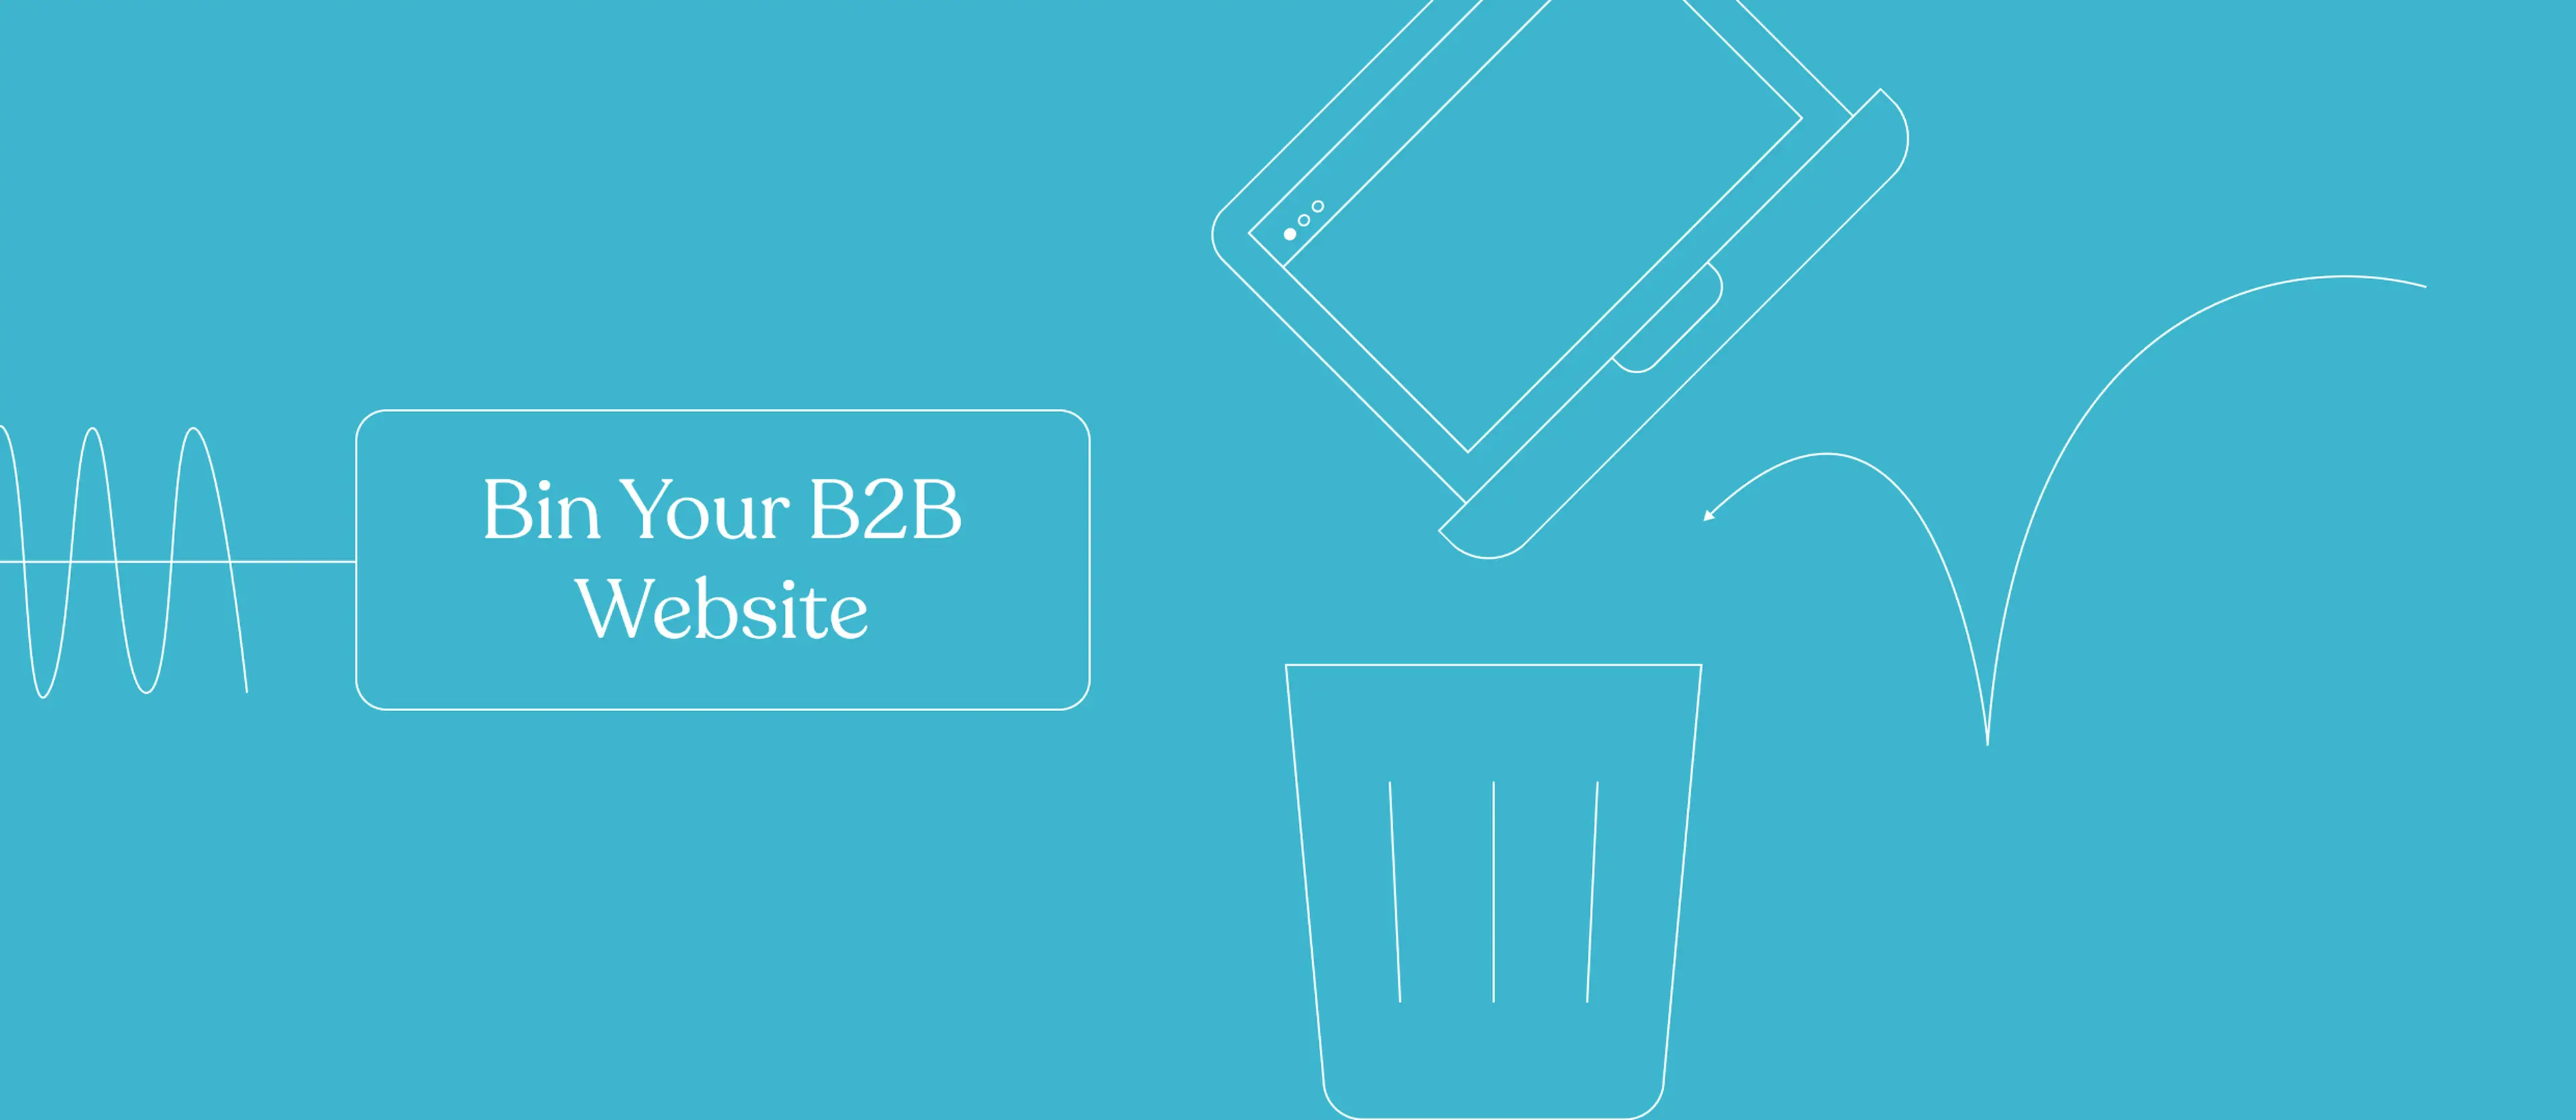 Blue graphic says Bin Your B2B Website 